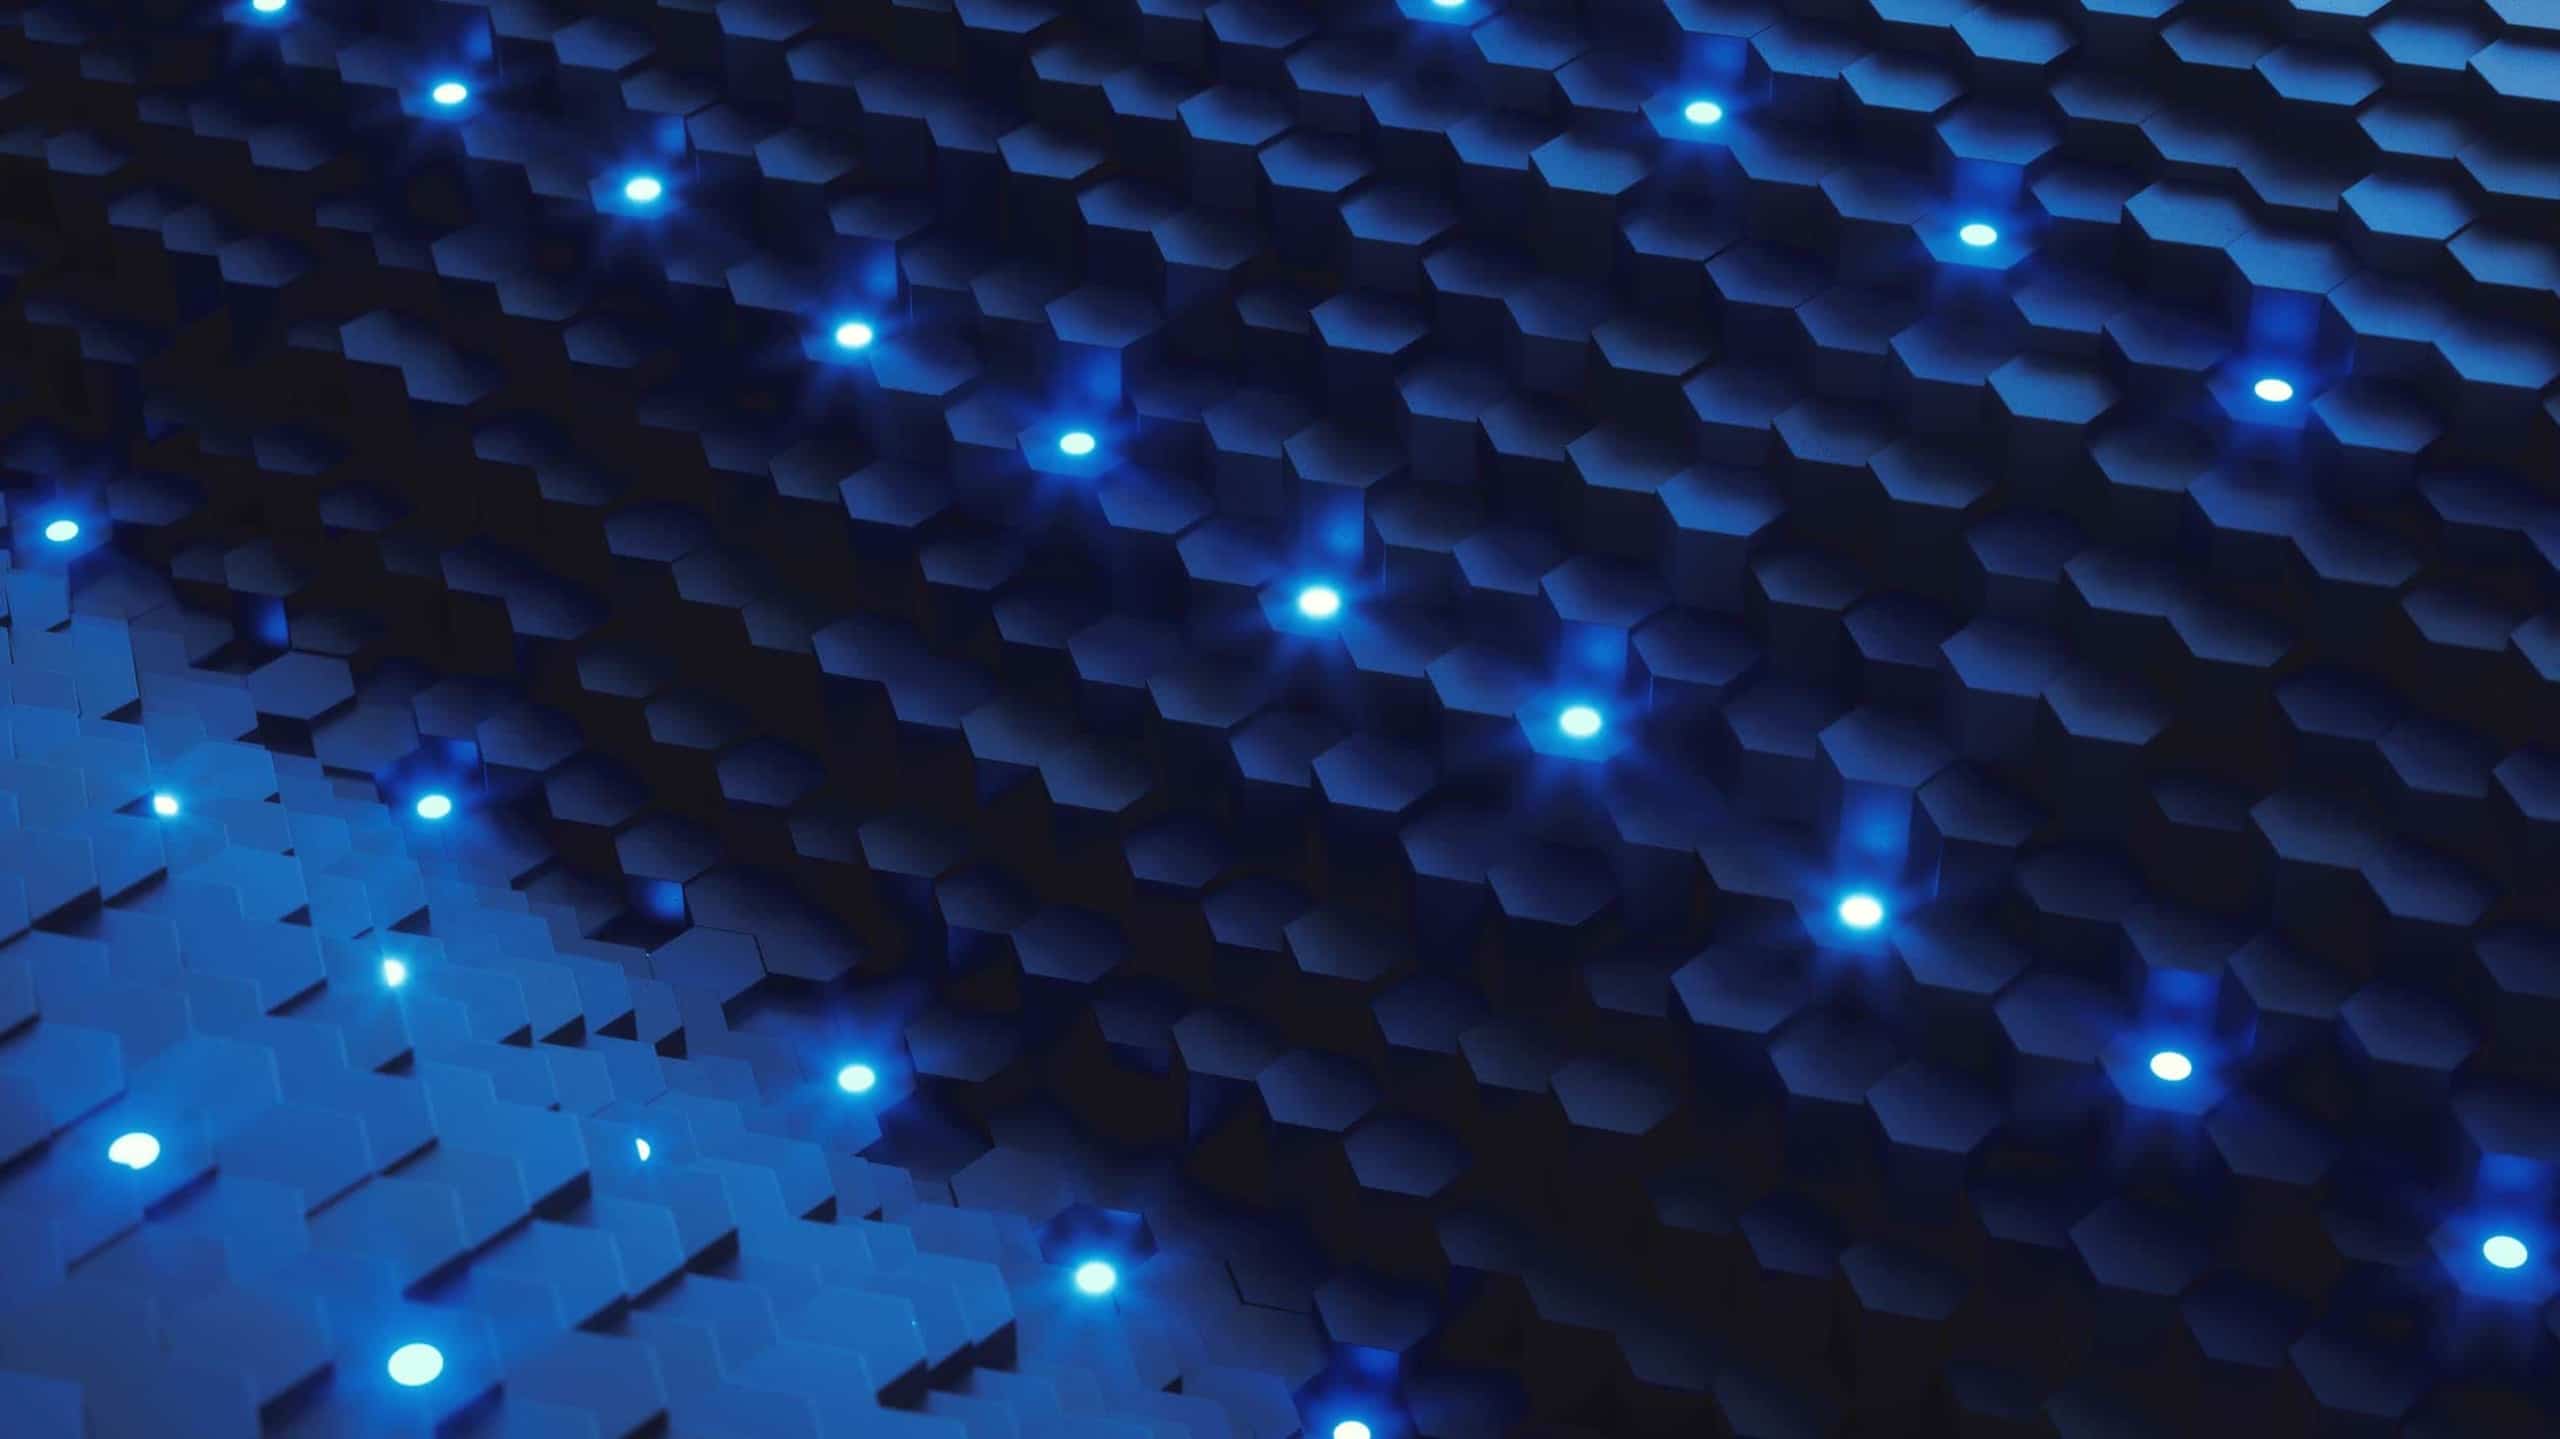 Abstract pattern of hexagonal shapes in shades of blue with glowing blue lights scattered throughout, creating a futuristic, geometric background.